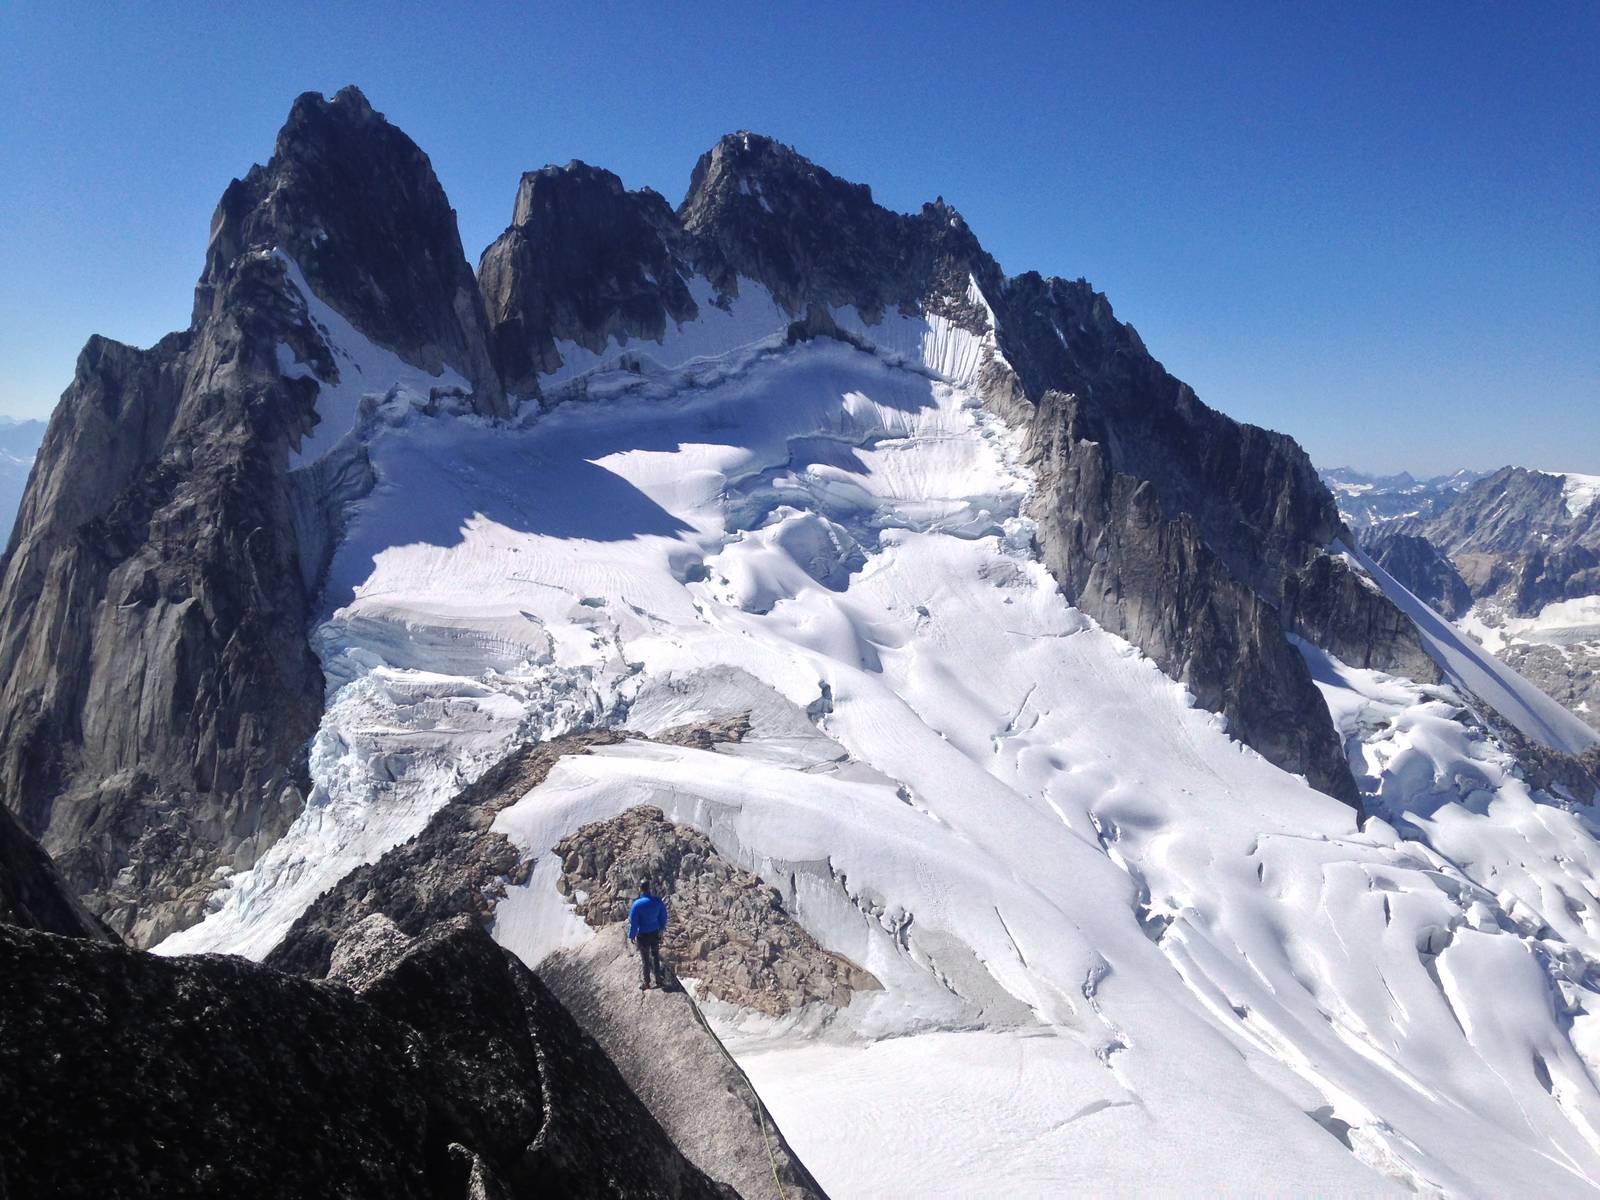 Valter getting some serious exposure on one of Pigeon Spire's knife ridges.